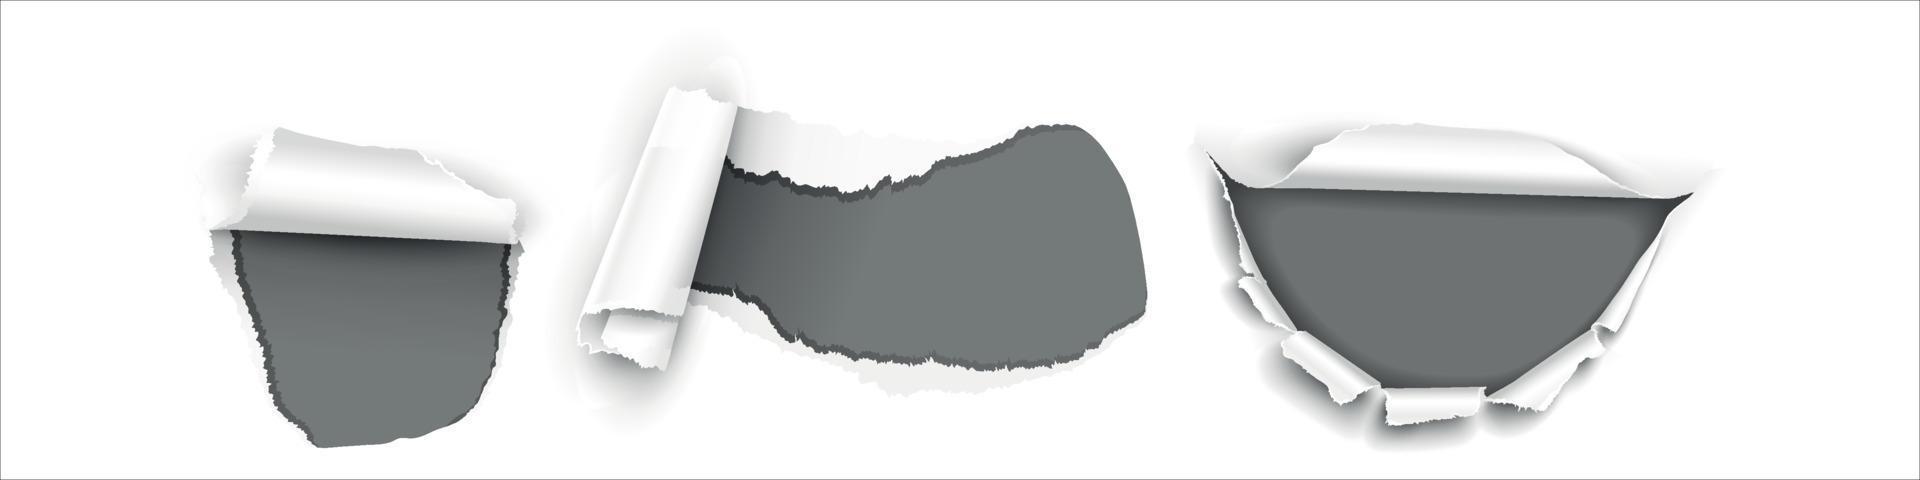 Torn Paper Realistic Vector eps 10